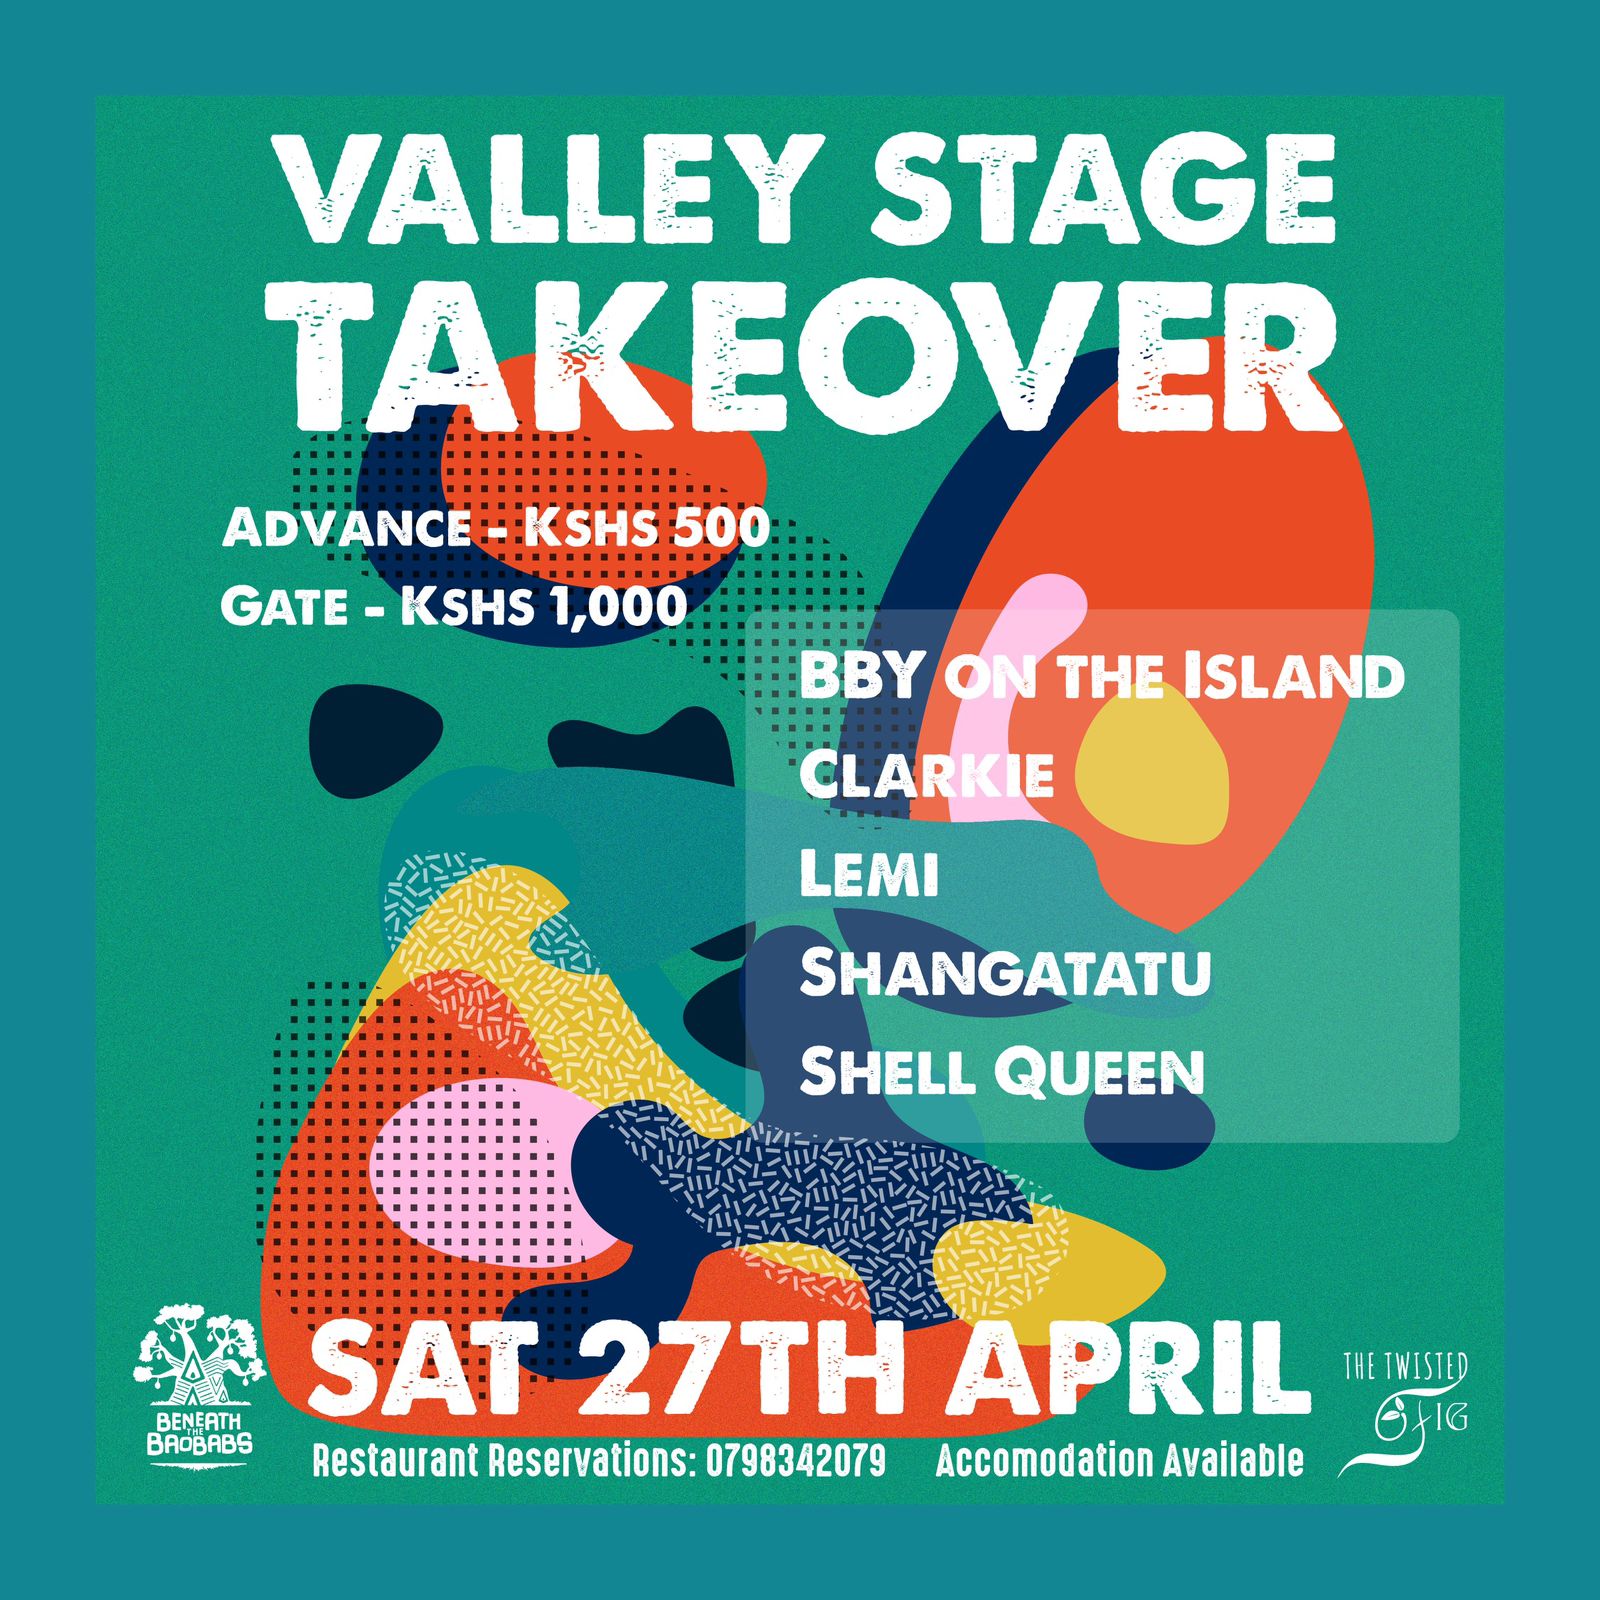 VALLEY STAGE TAKEOVER